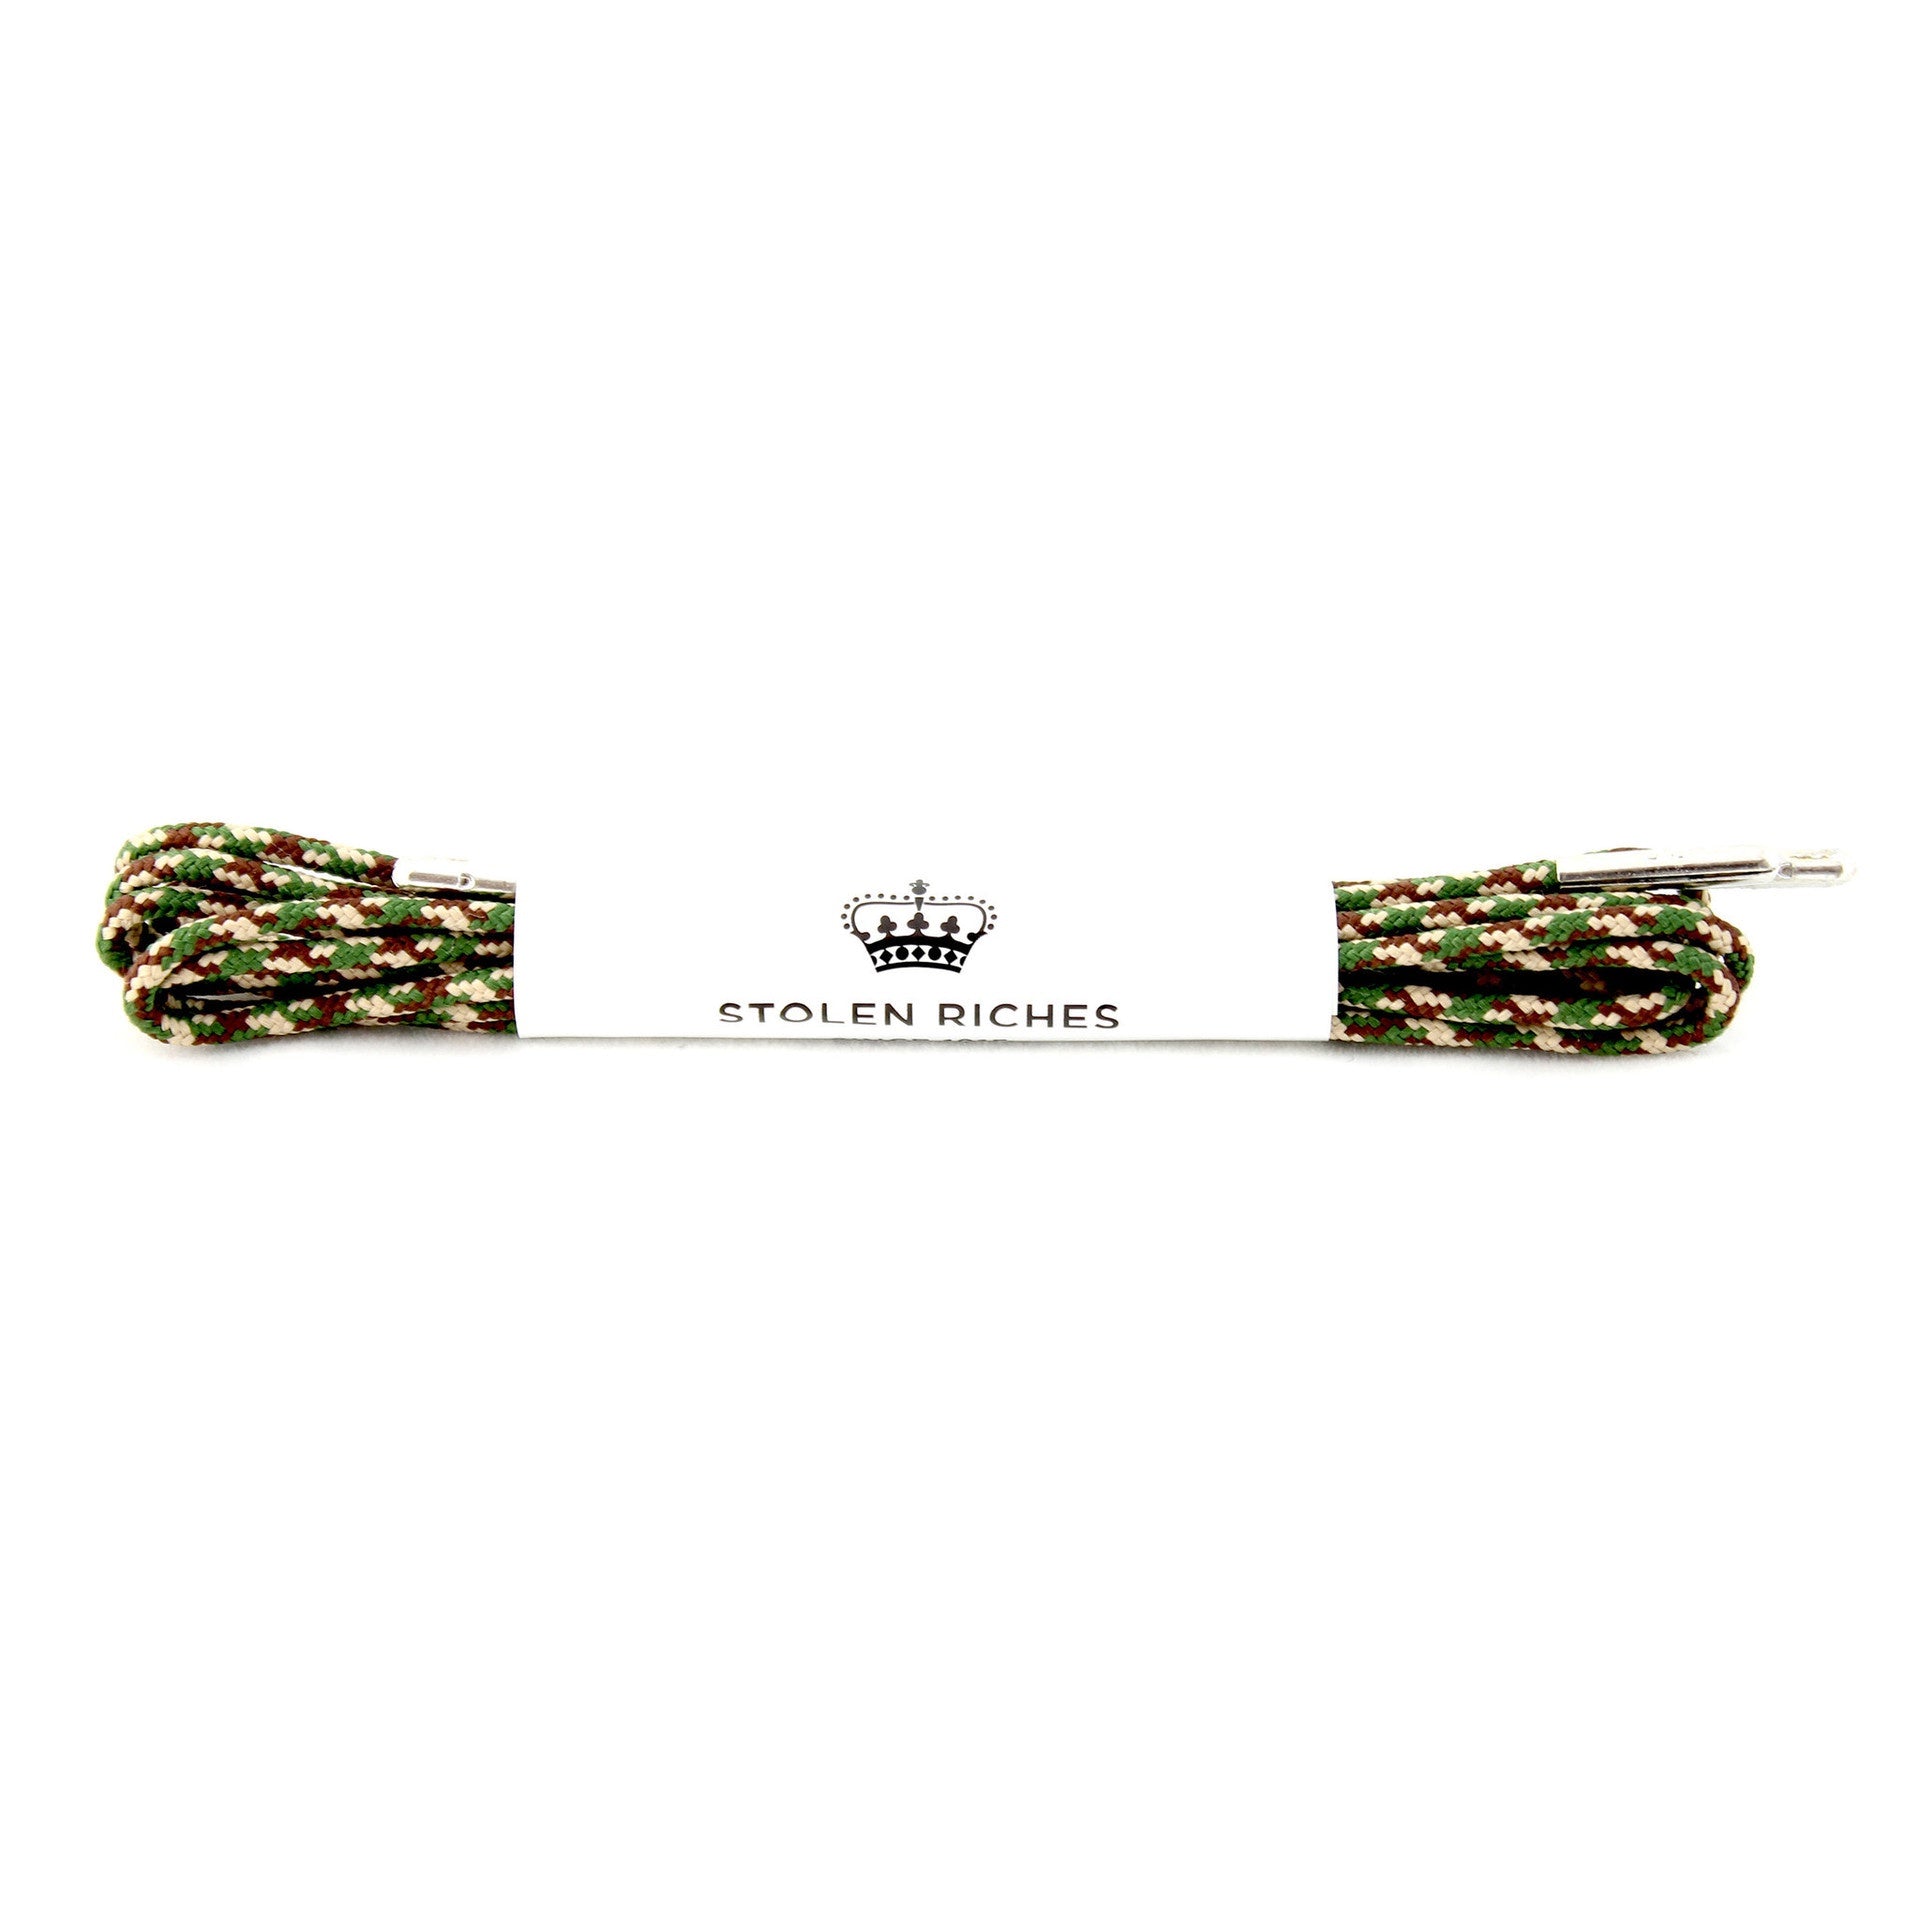 STOLEN RICHES - DRESS LACES (5-6 EYELETS) IN CAMO GREEN